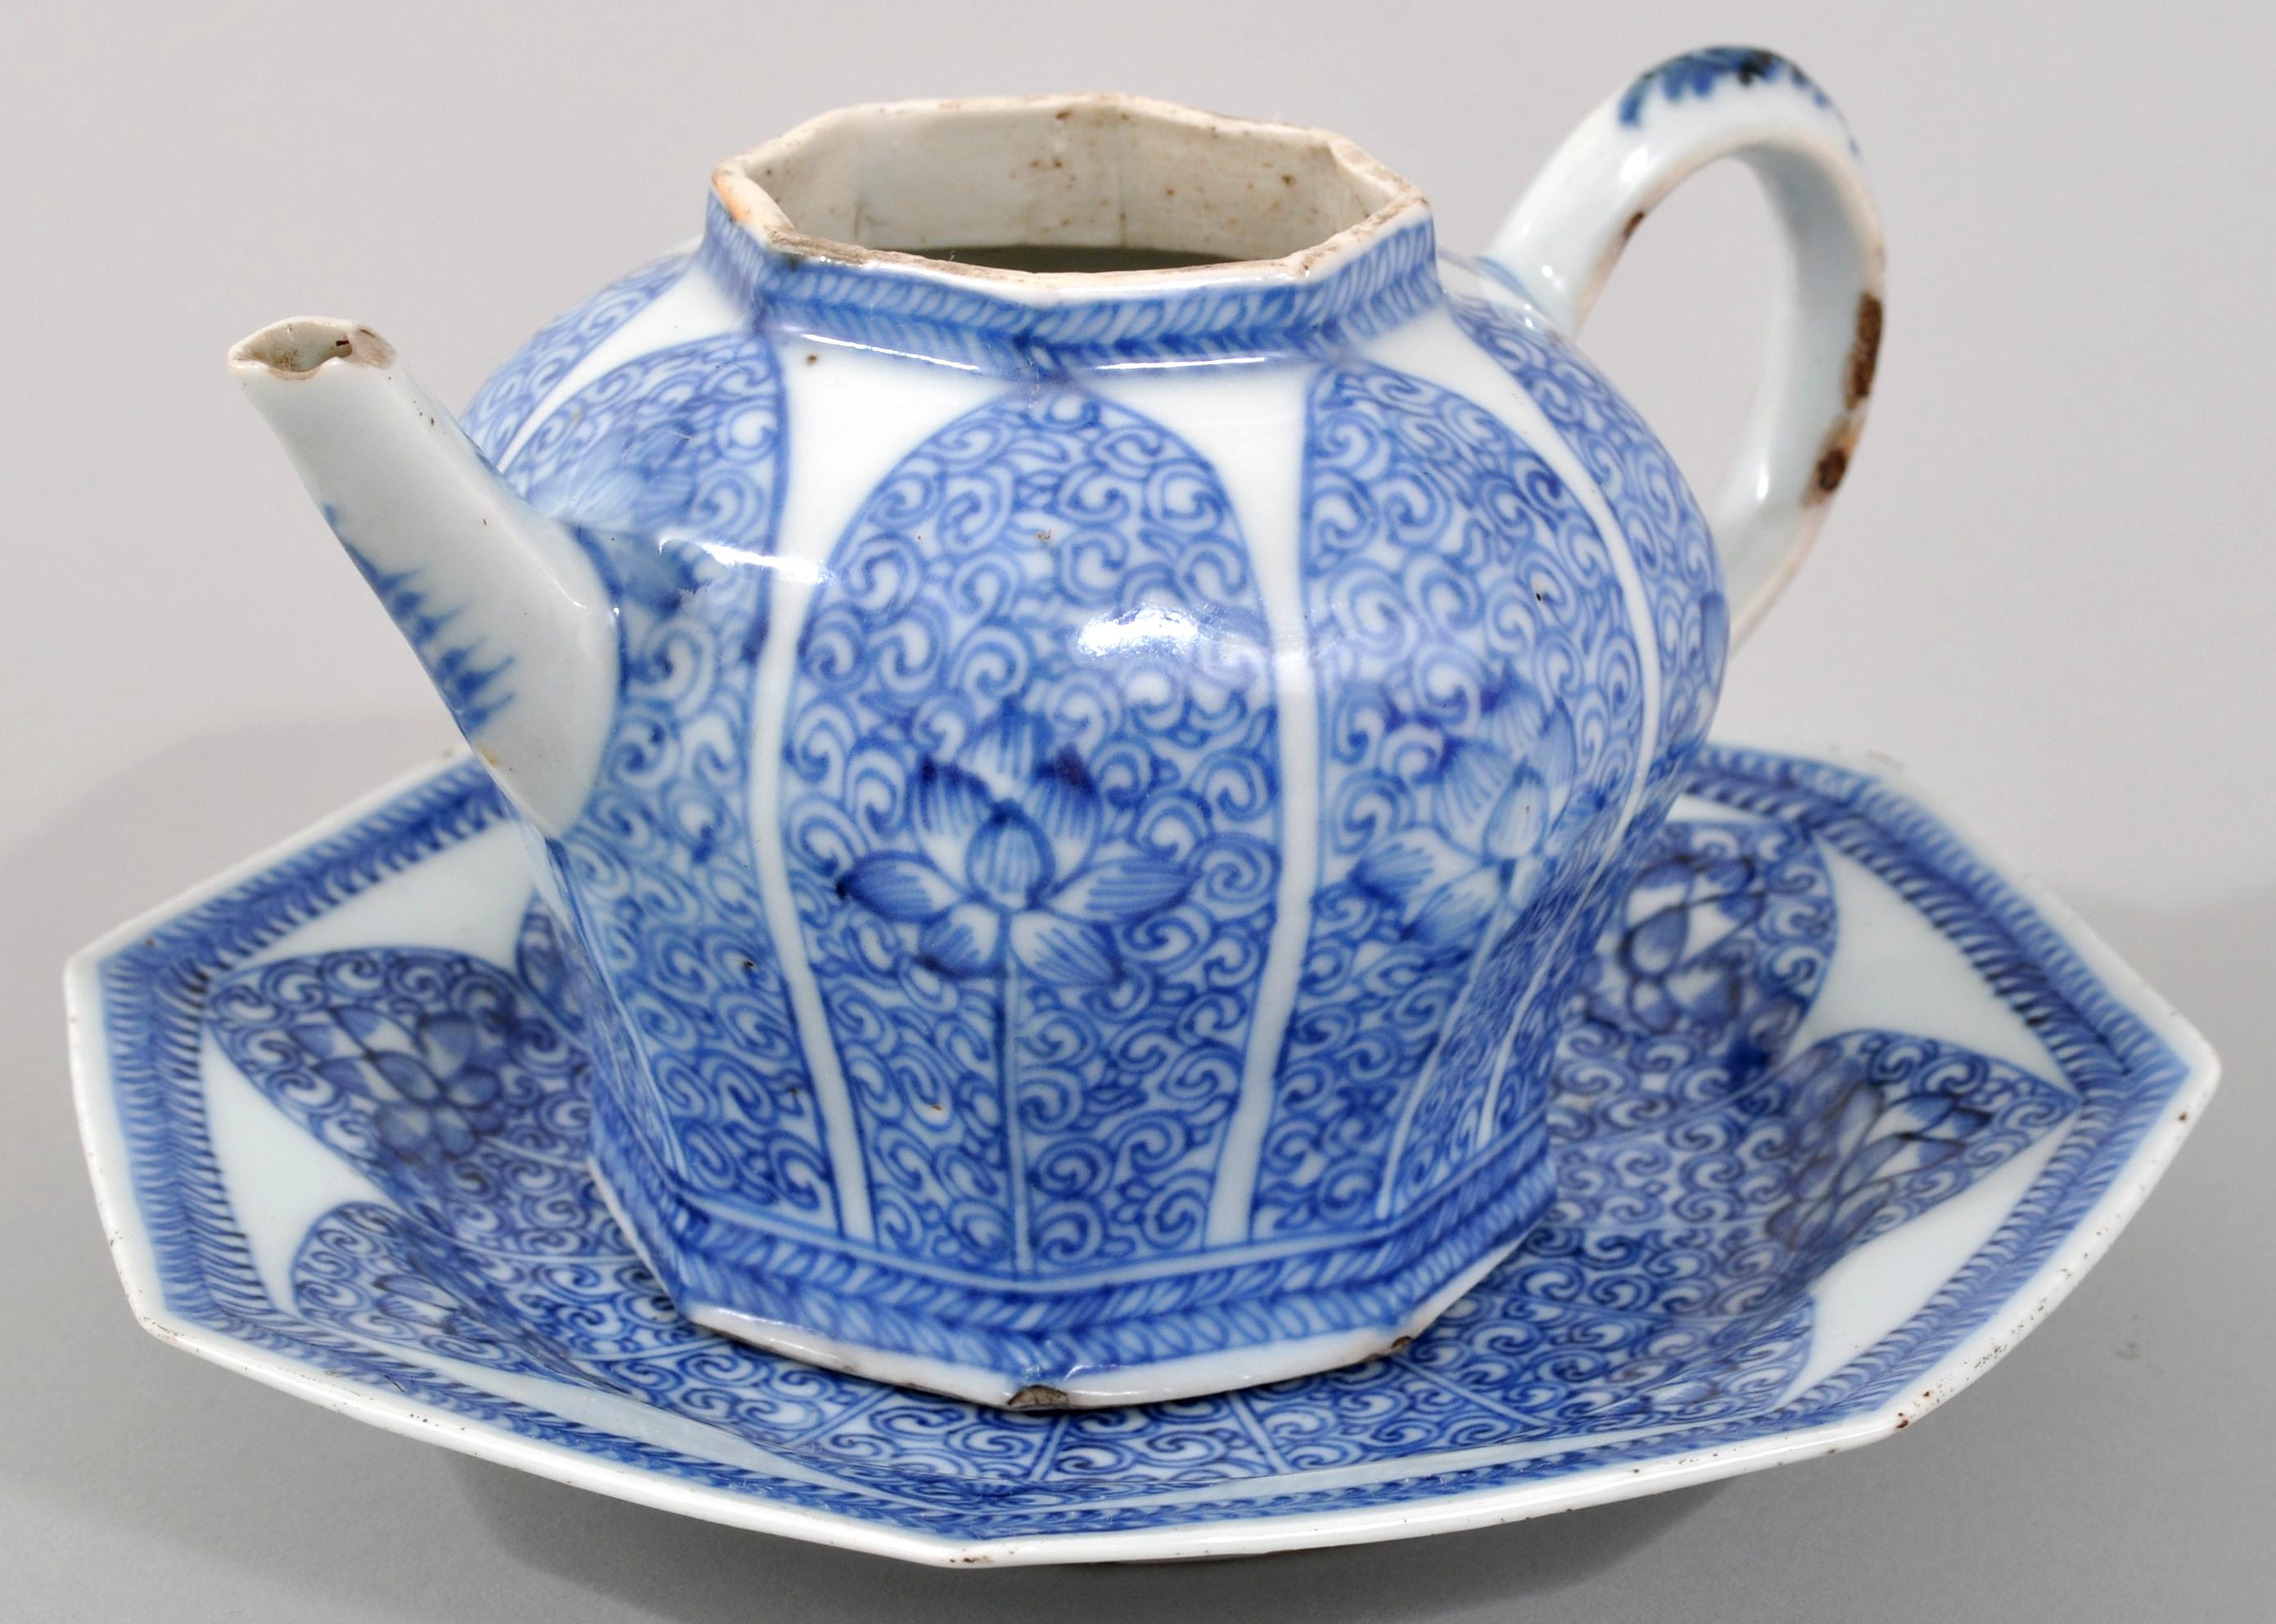 Antique 17th century Chinese Kangxi Period blue and white teapot and stand in the Islamic style, circa 1650. The teapot and stand decorated in underglazed blue with Arabesque decoration. Both teapot and stand made for the Middle Eastern market